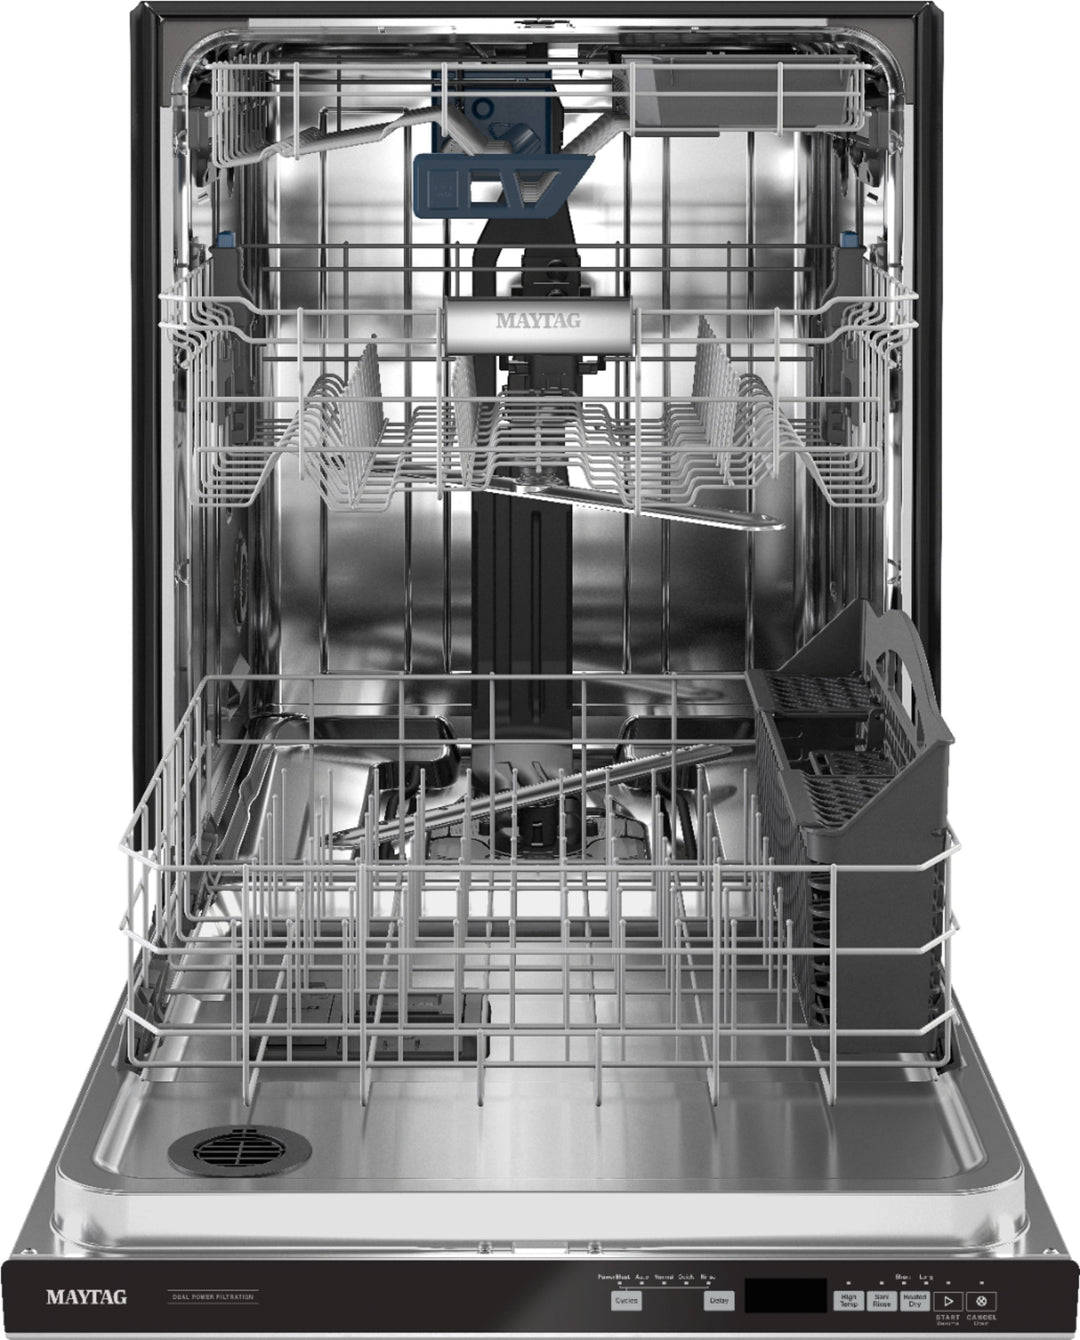 Maytag - Top Control Built-In Dishwasher with Stainless Steel Tub, Dual Power Filtration, 3rd Rack, 47dBA - Stainless steel_8